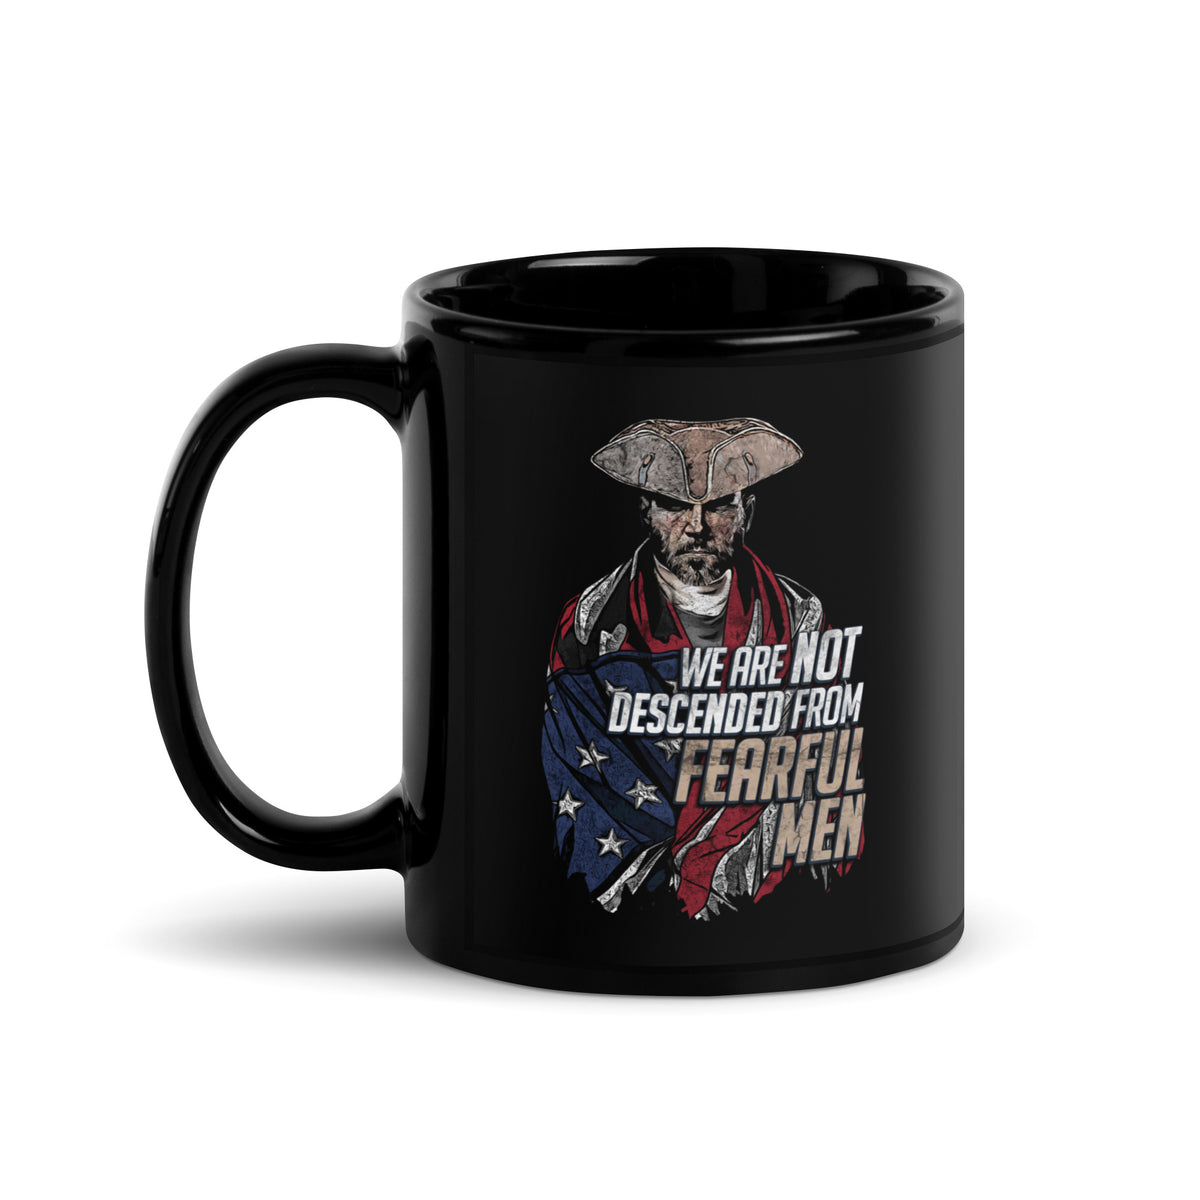 Not Descended from Fearful Men Mug